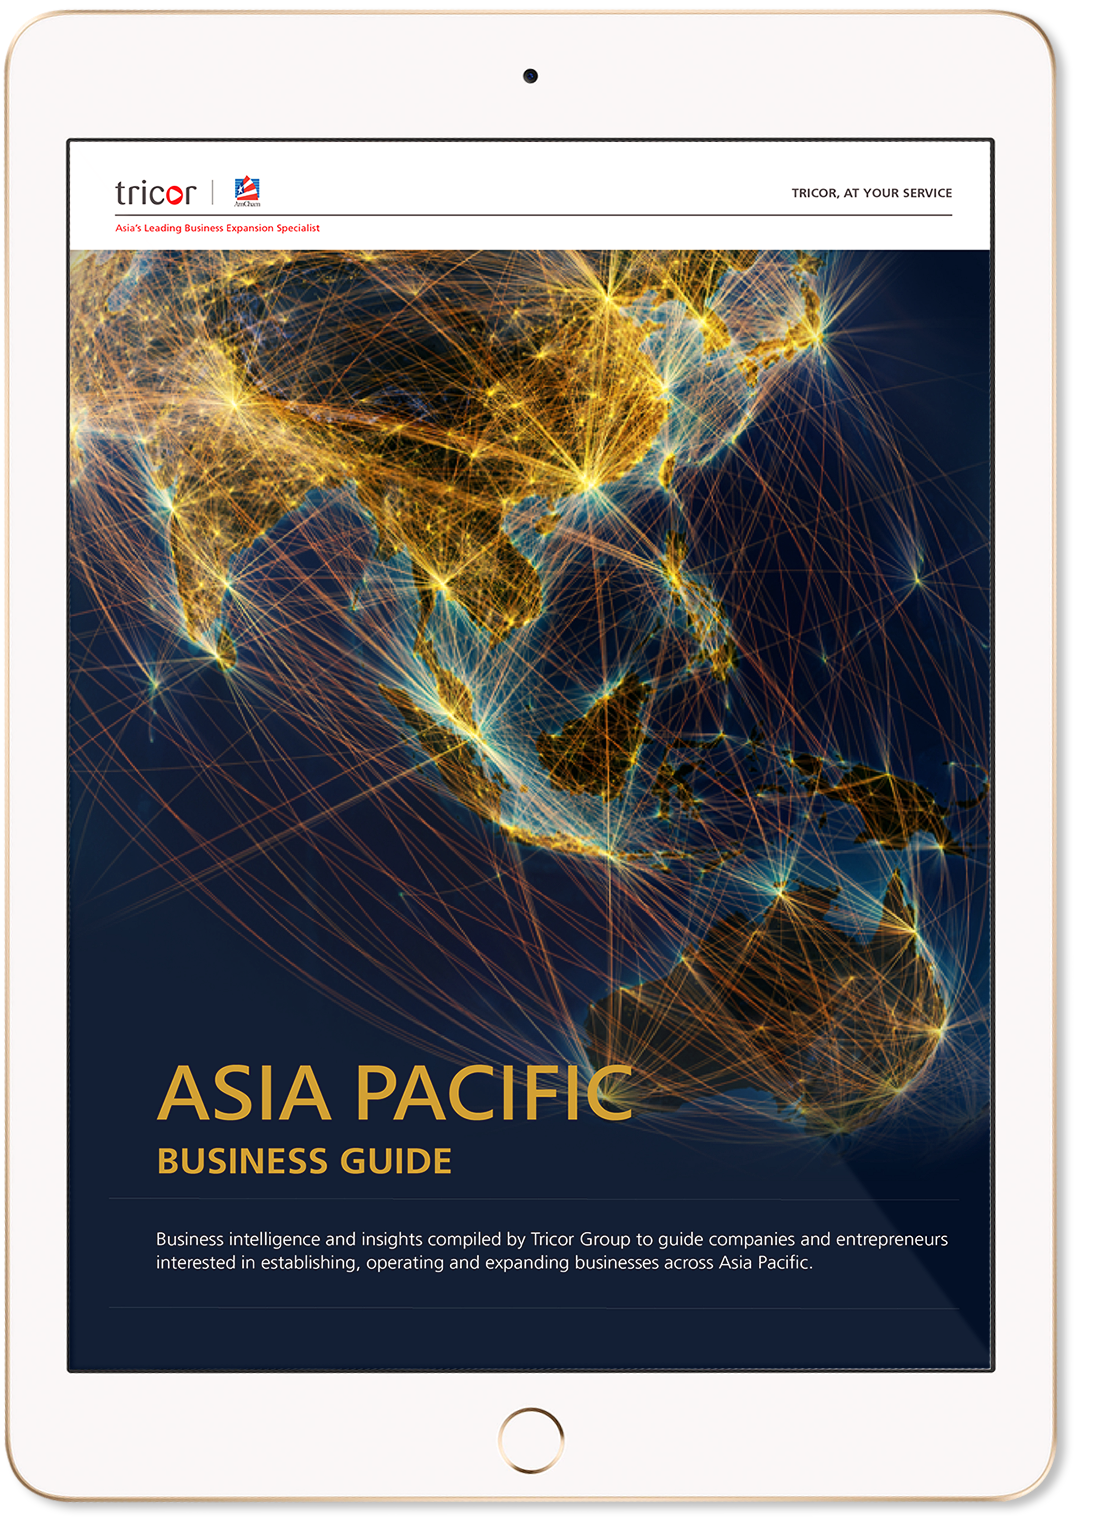 Doing business in Asia Pacific